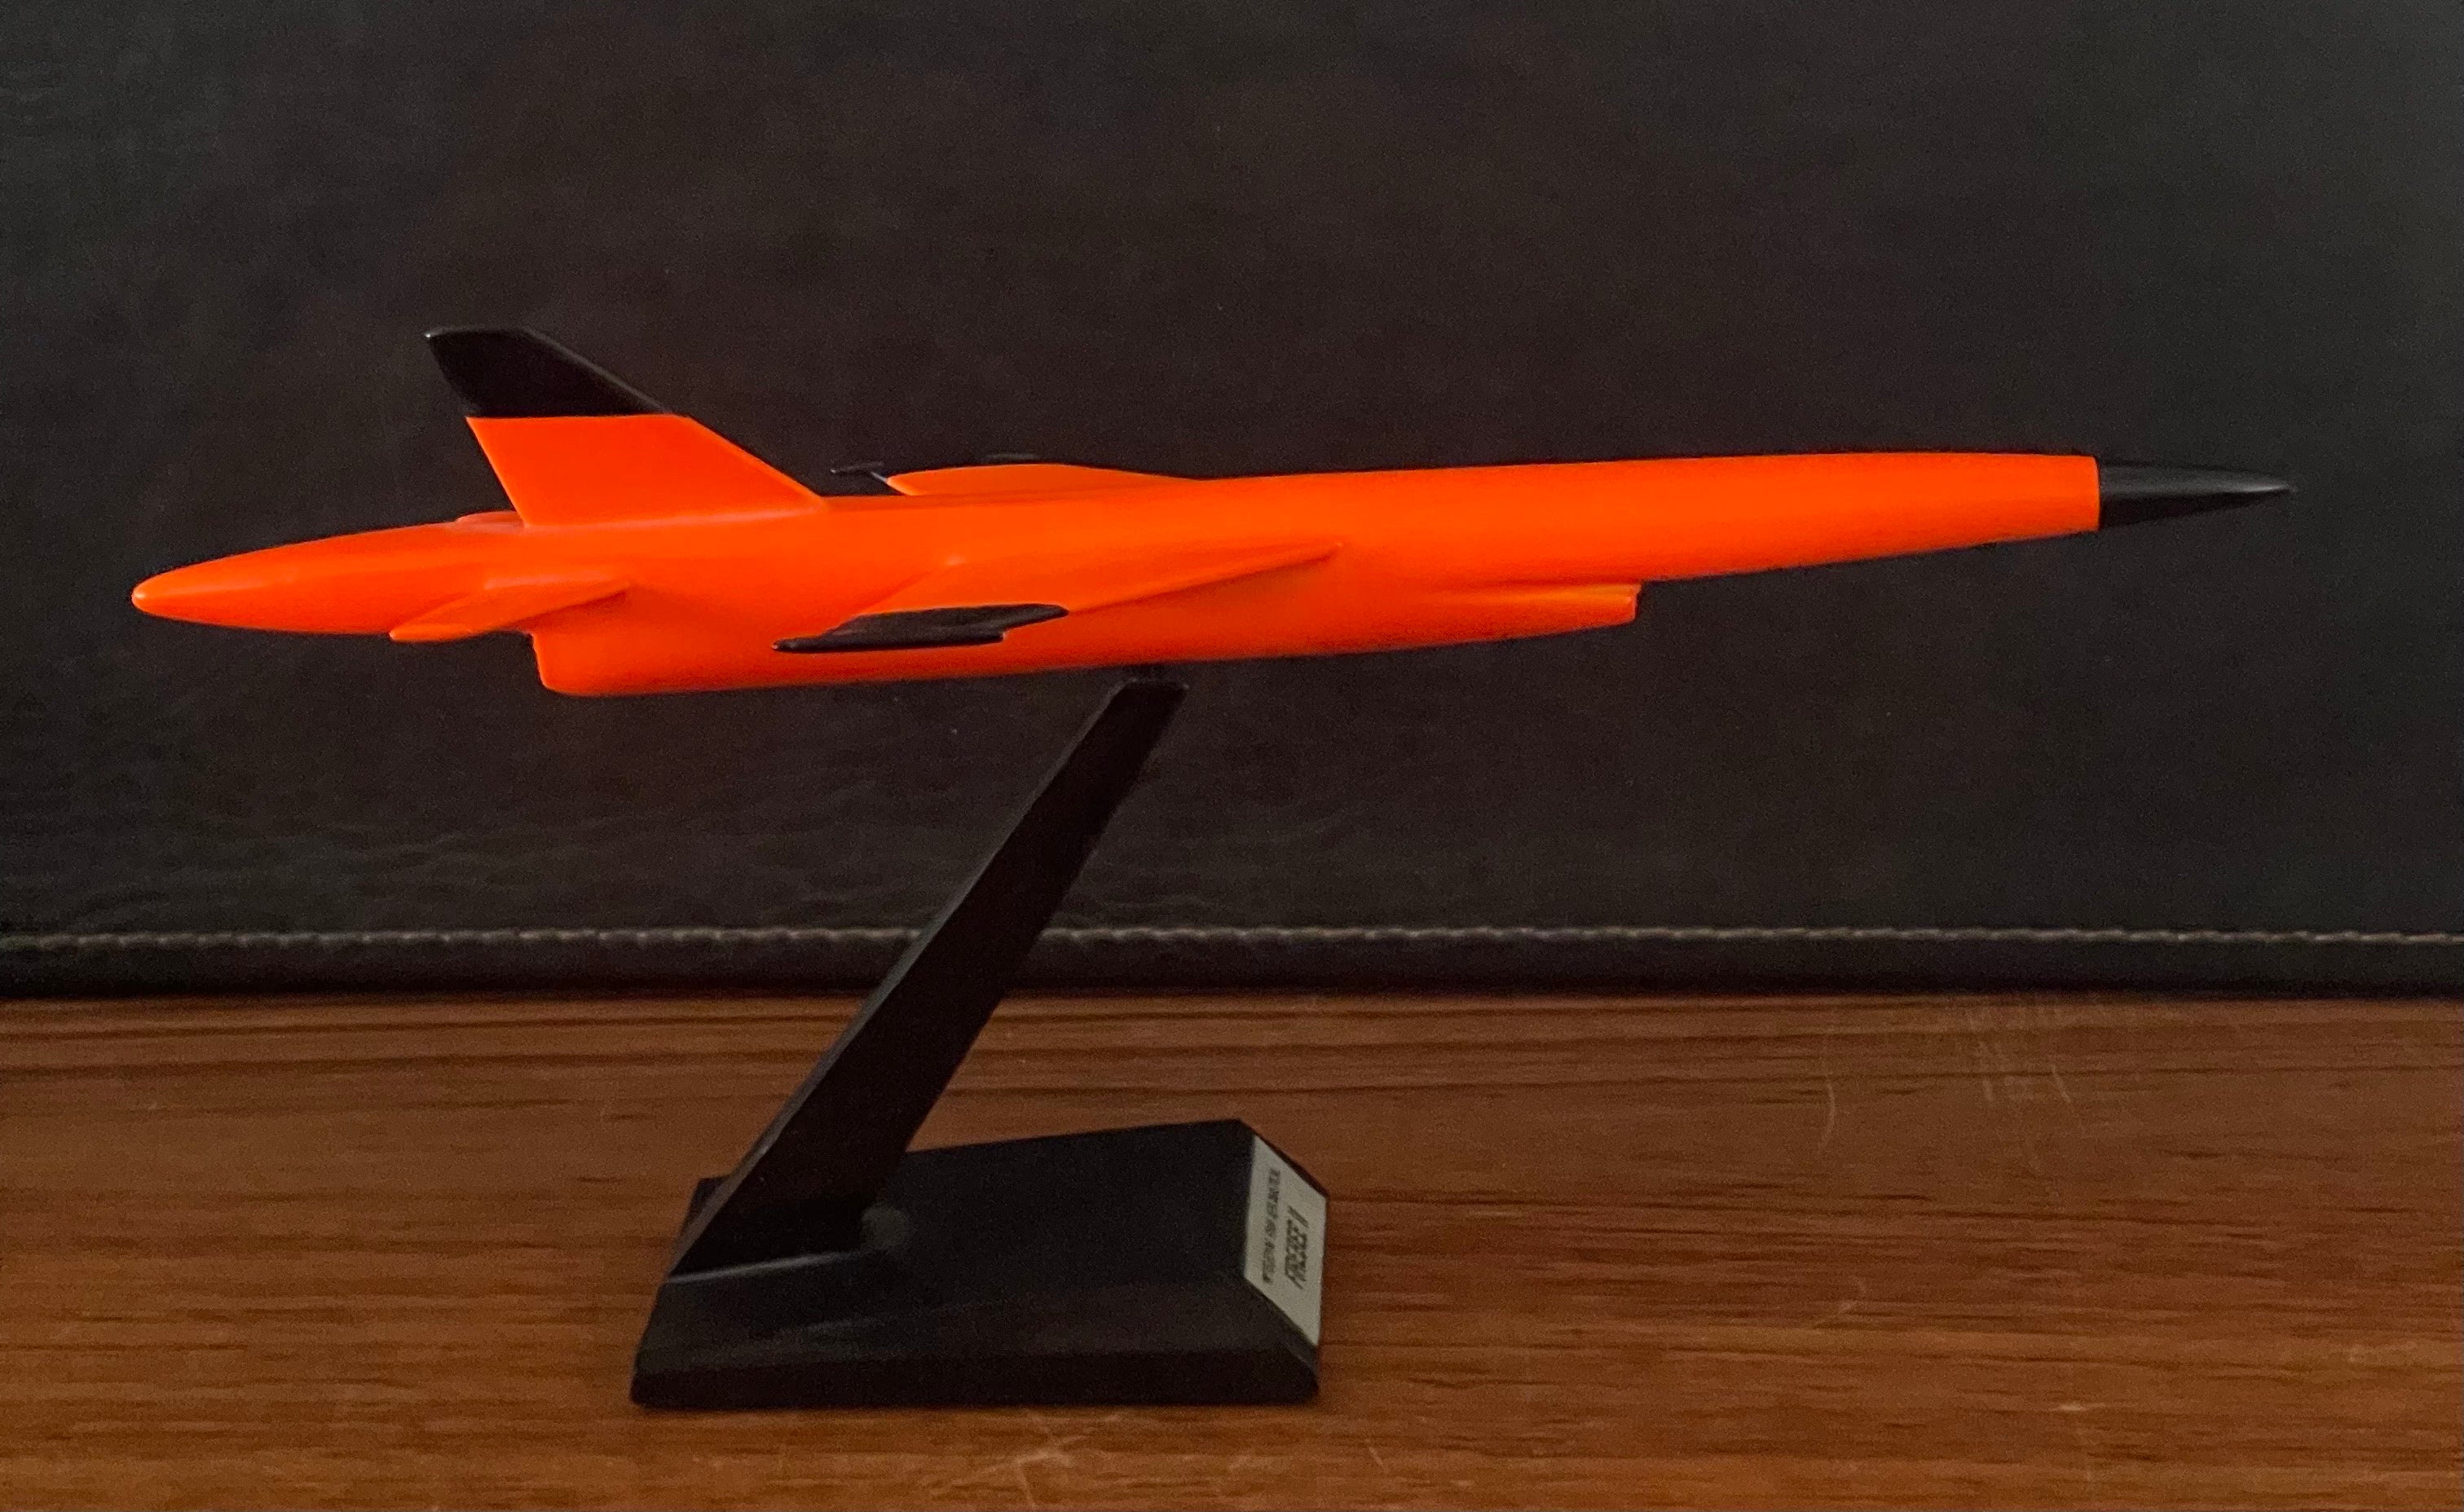 A very cool and extremely rare Teledyne Ryan Firebee II contractor's desk model, circa 1970s. The piece is in very good condition and super high quality. It is made of wood and mounted on a triangular plastic base; the desk model measures 3.75